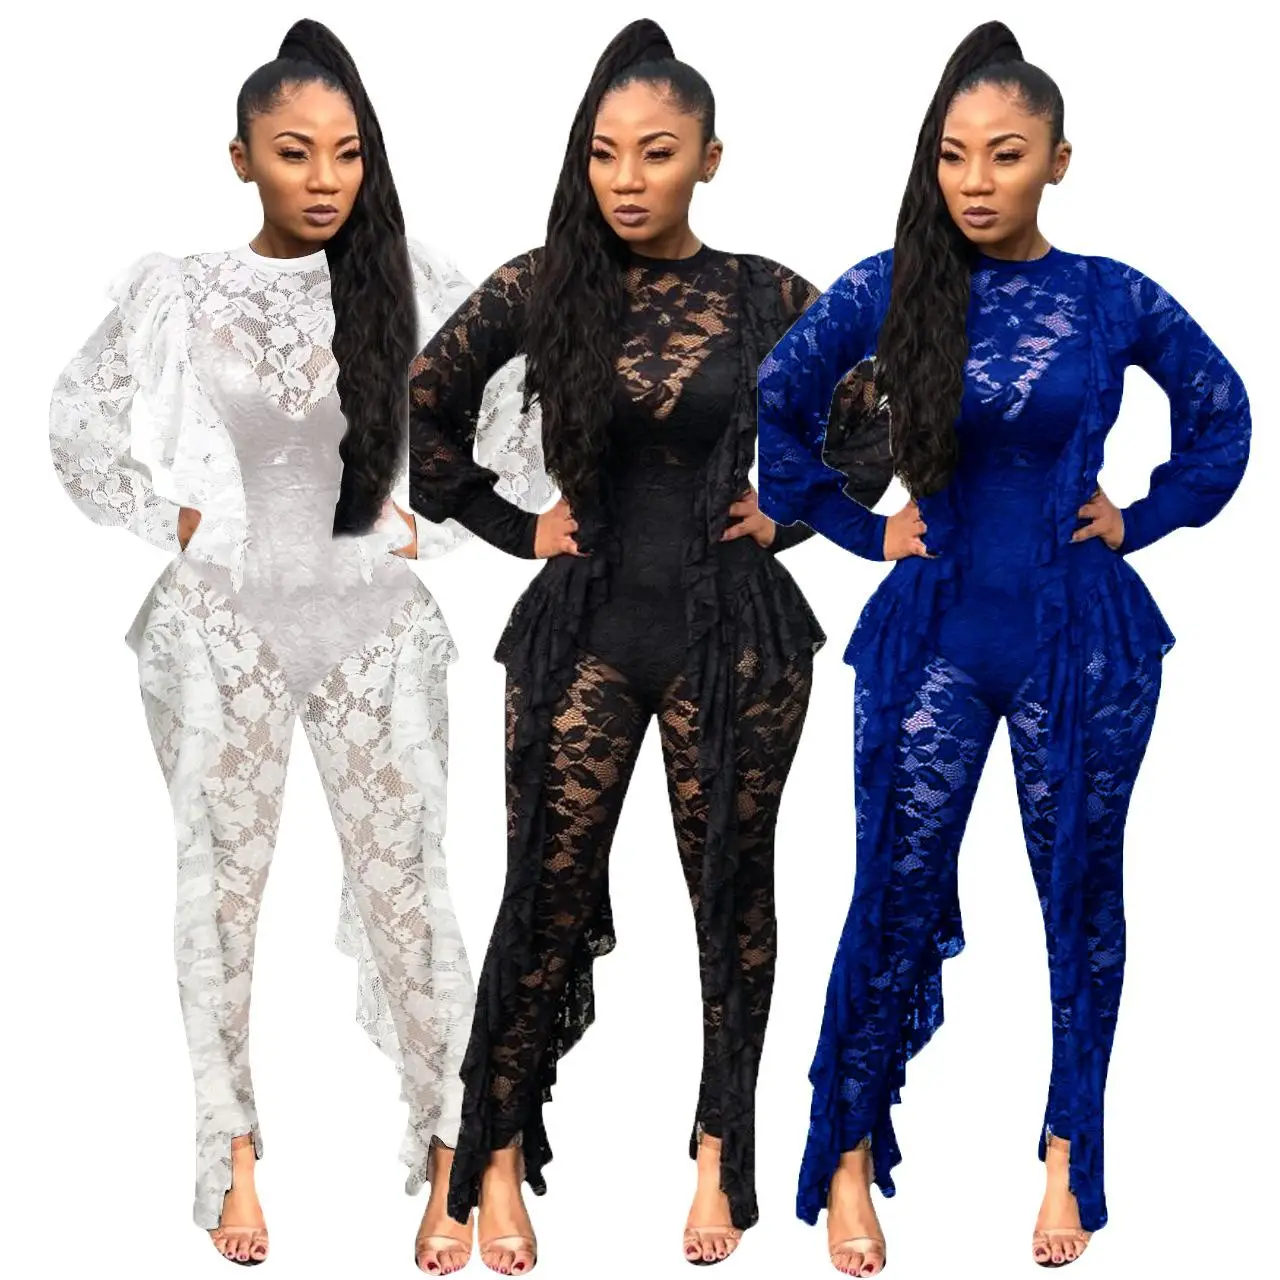 

Sexy Women Jumpsuit long sleeve Plus Size Summer Romper Wide Leg Trousers Womens Casual Clubwear Outfits Blue OL Mesh Overalls